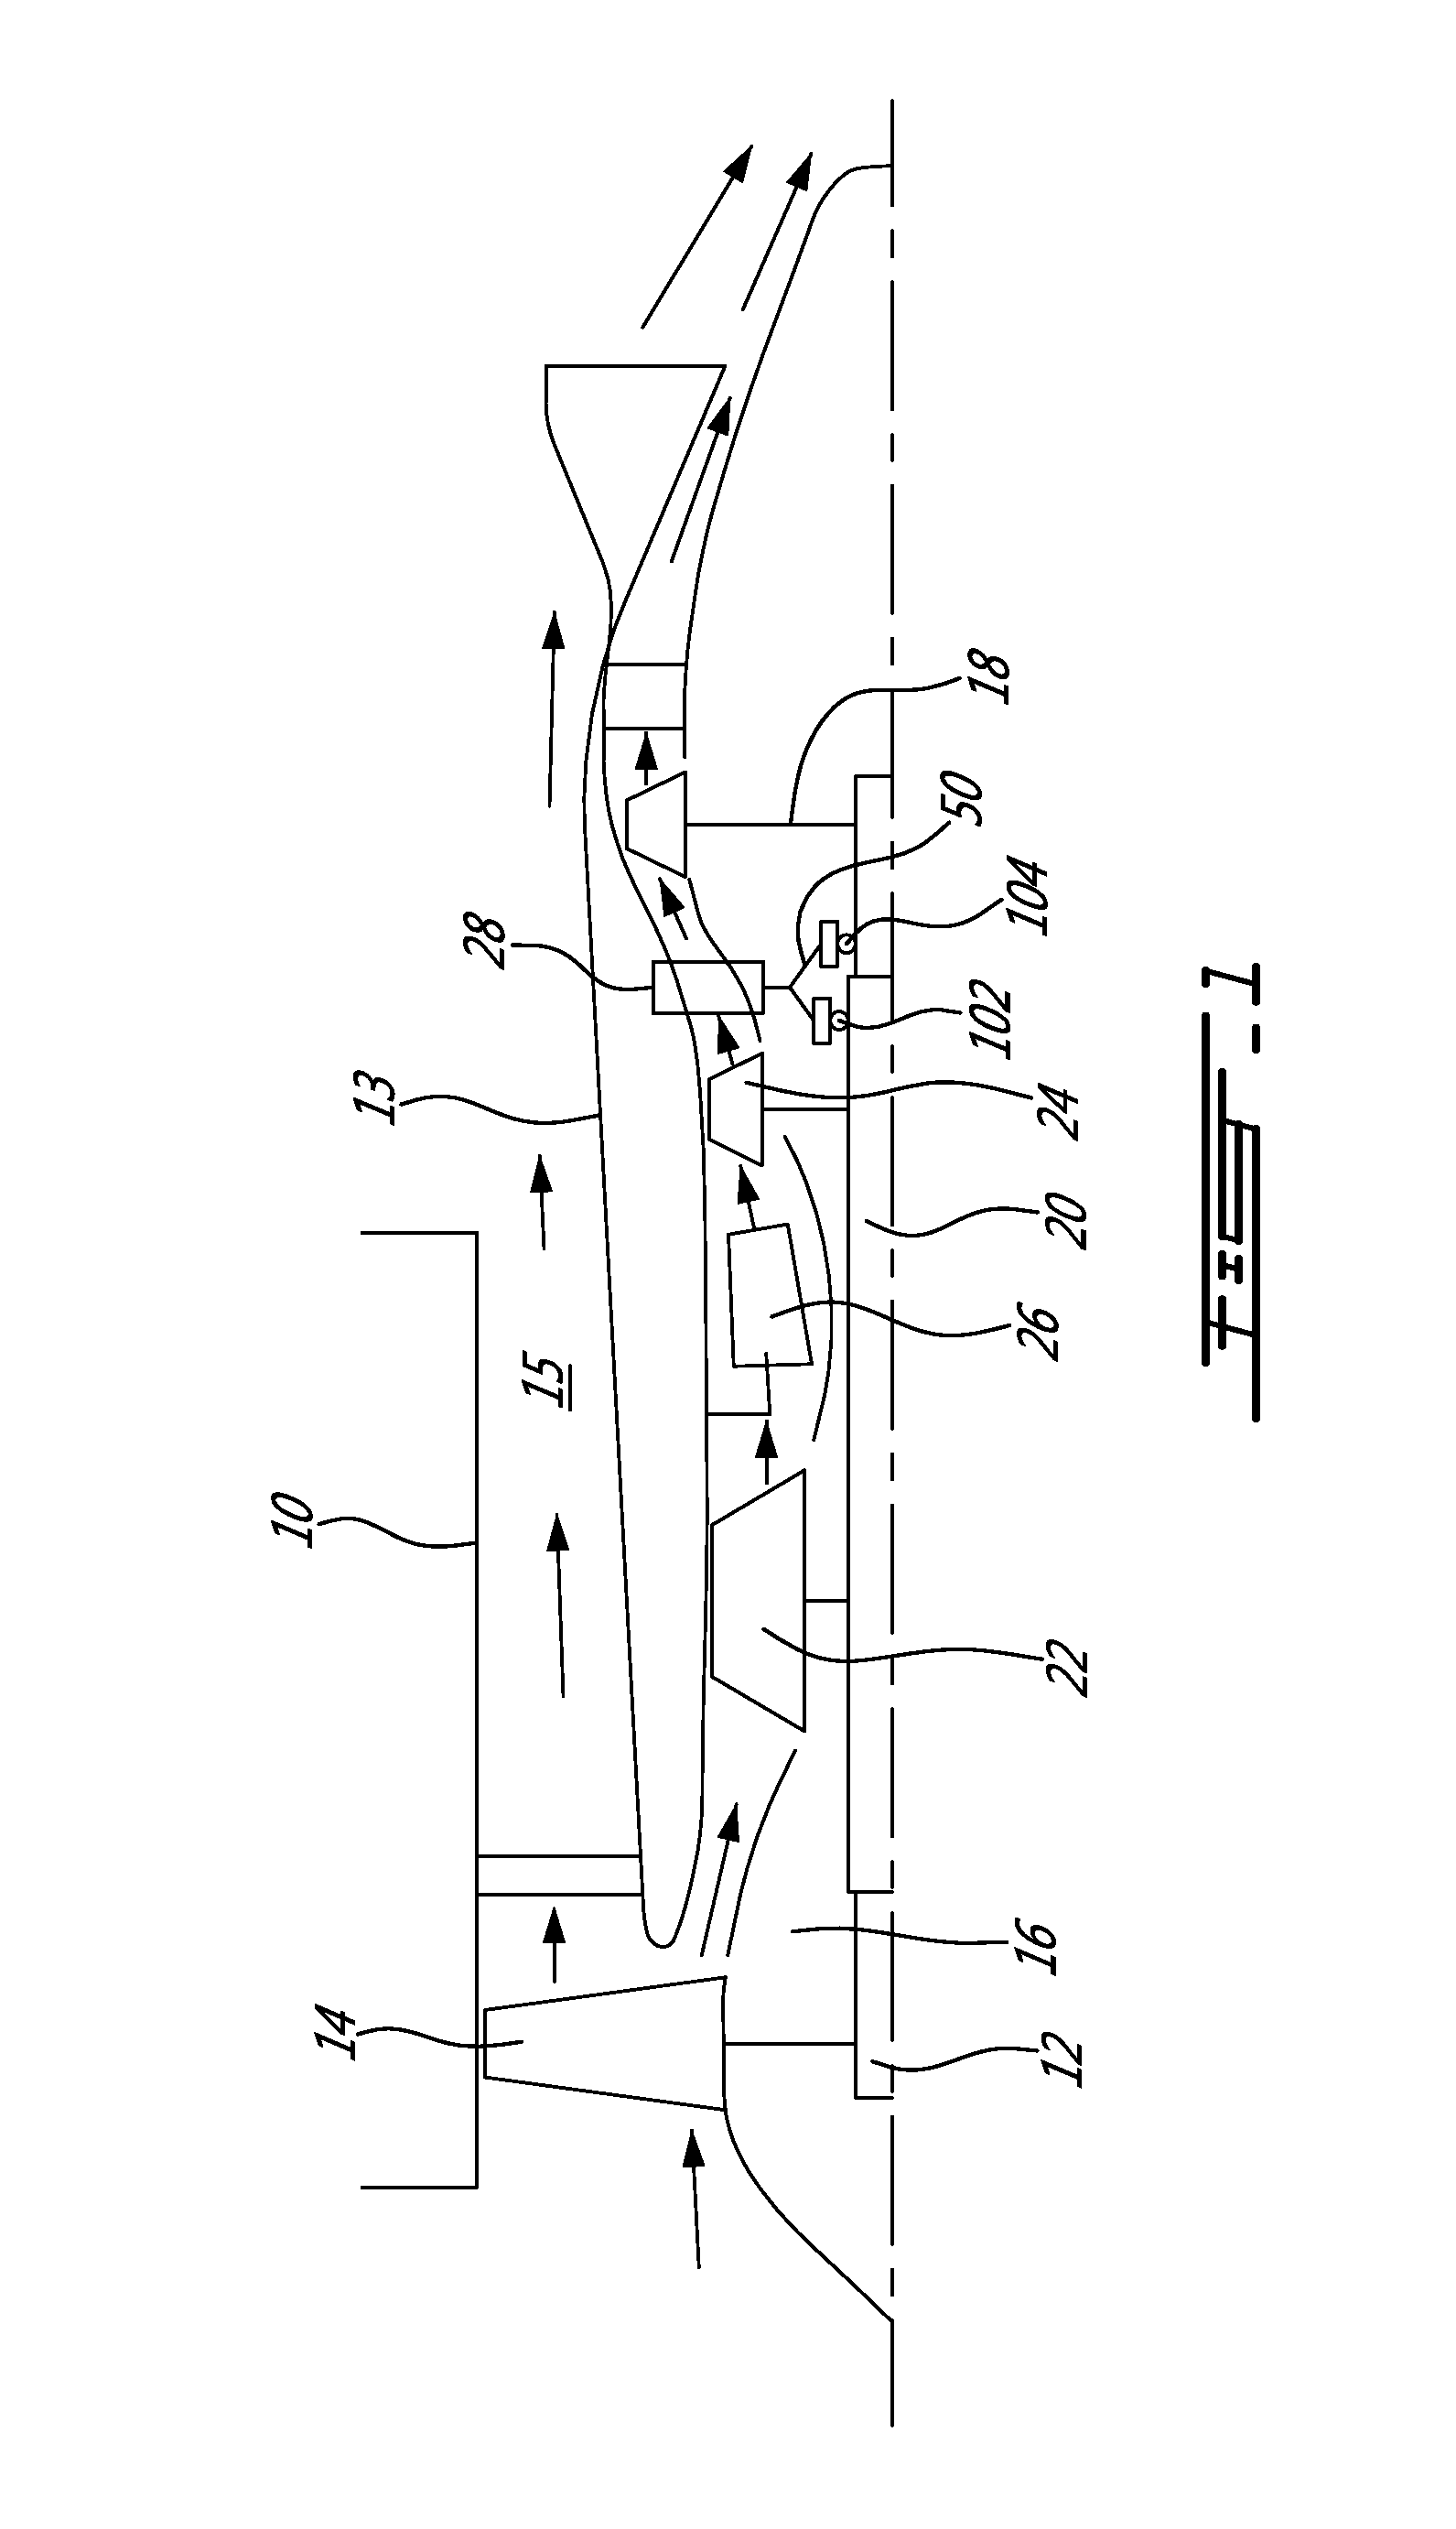 Air system architecture for a mid-turbine frame module